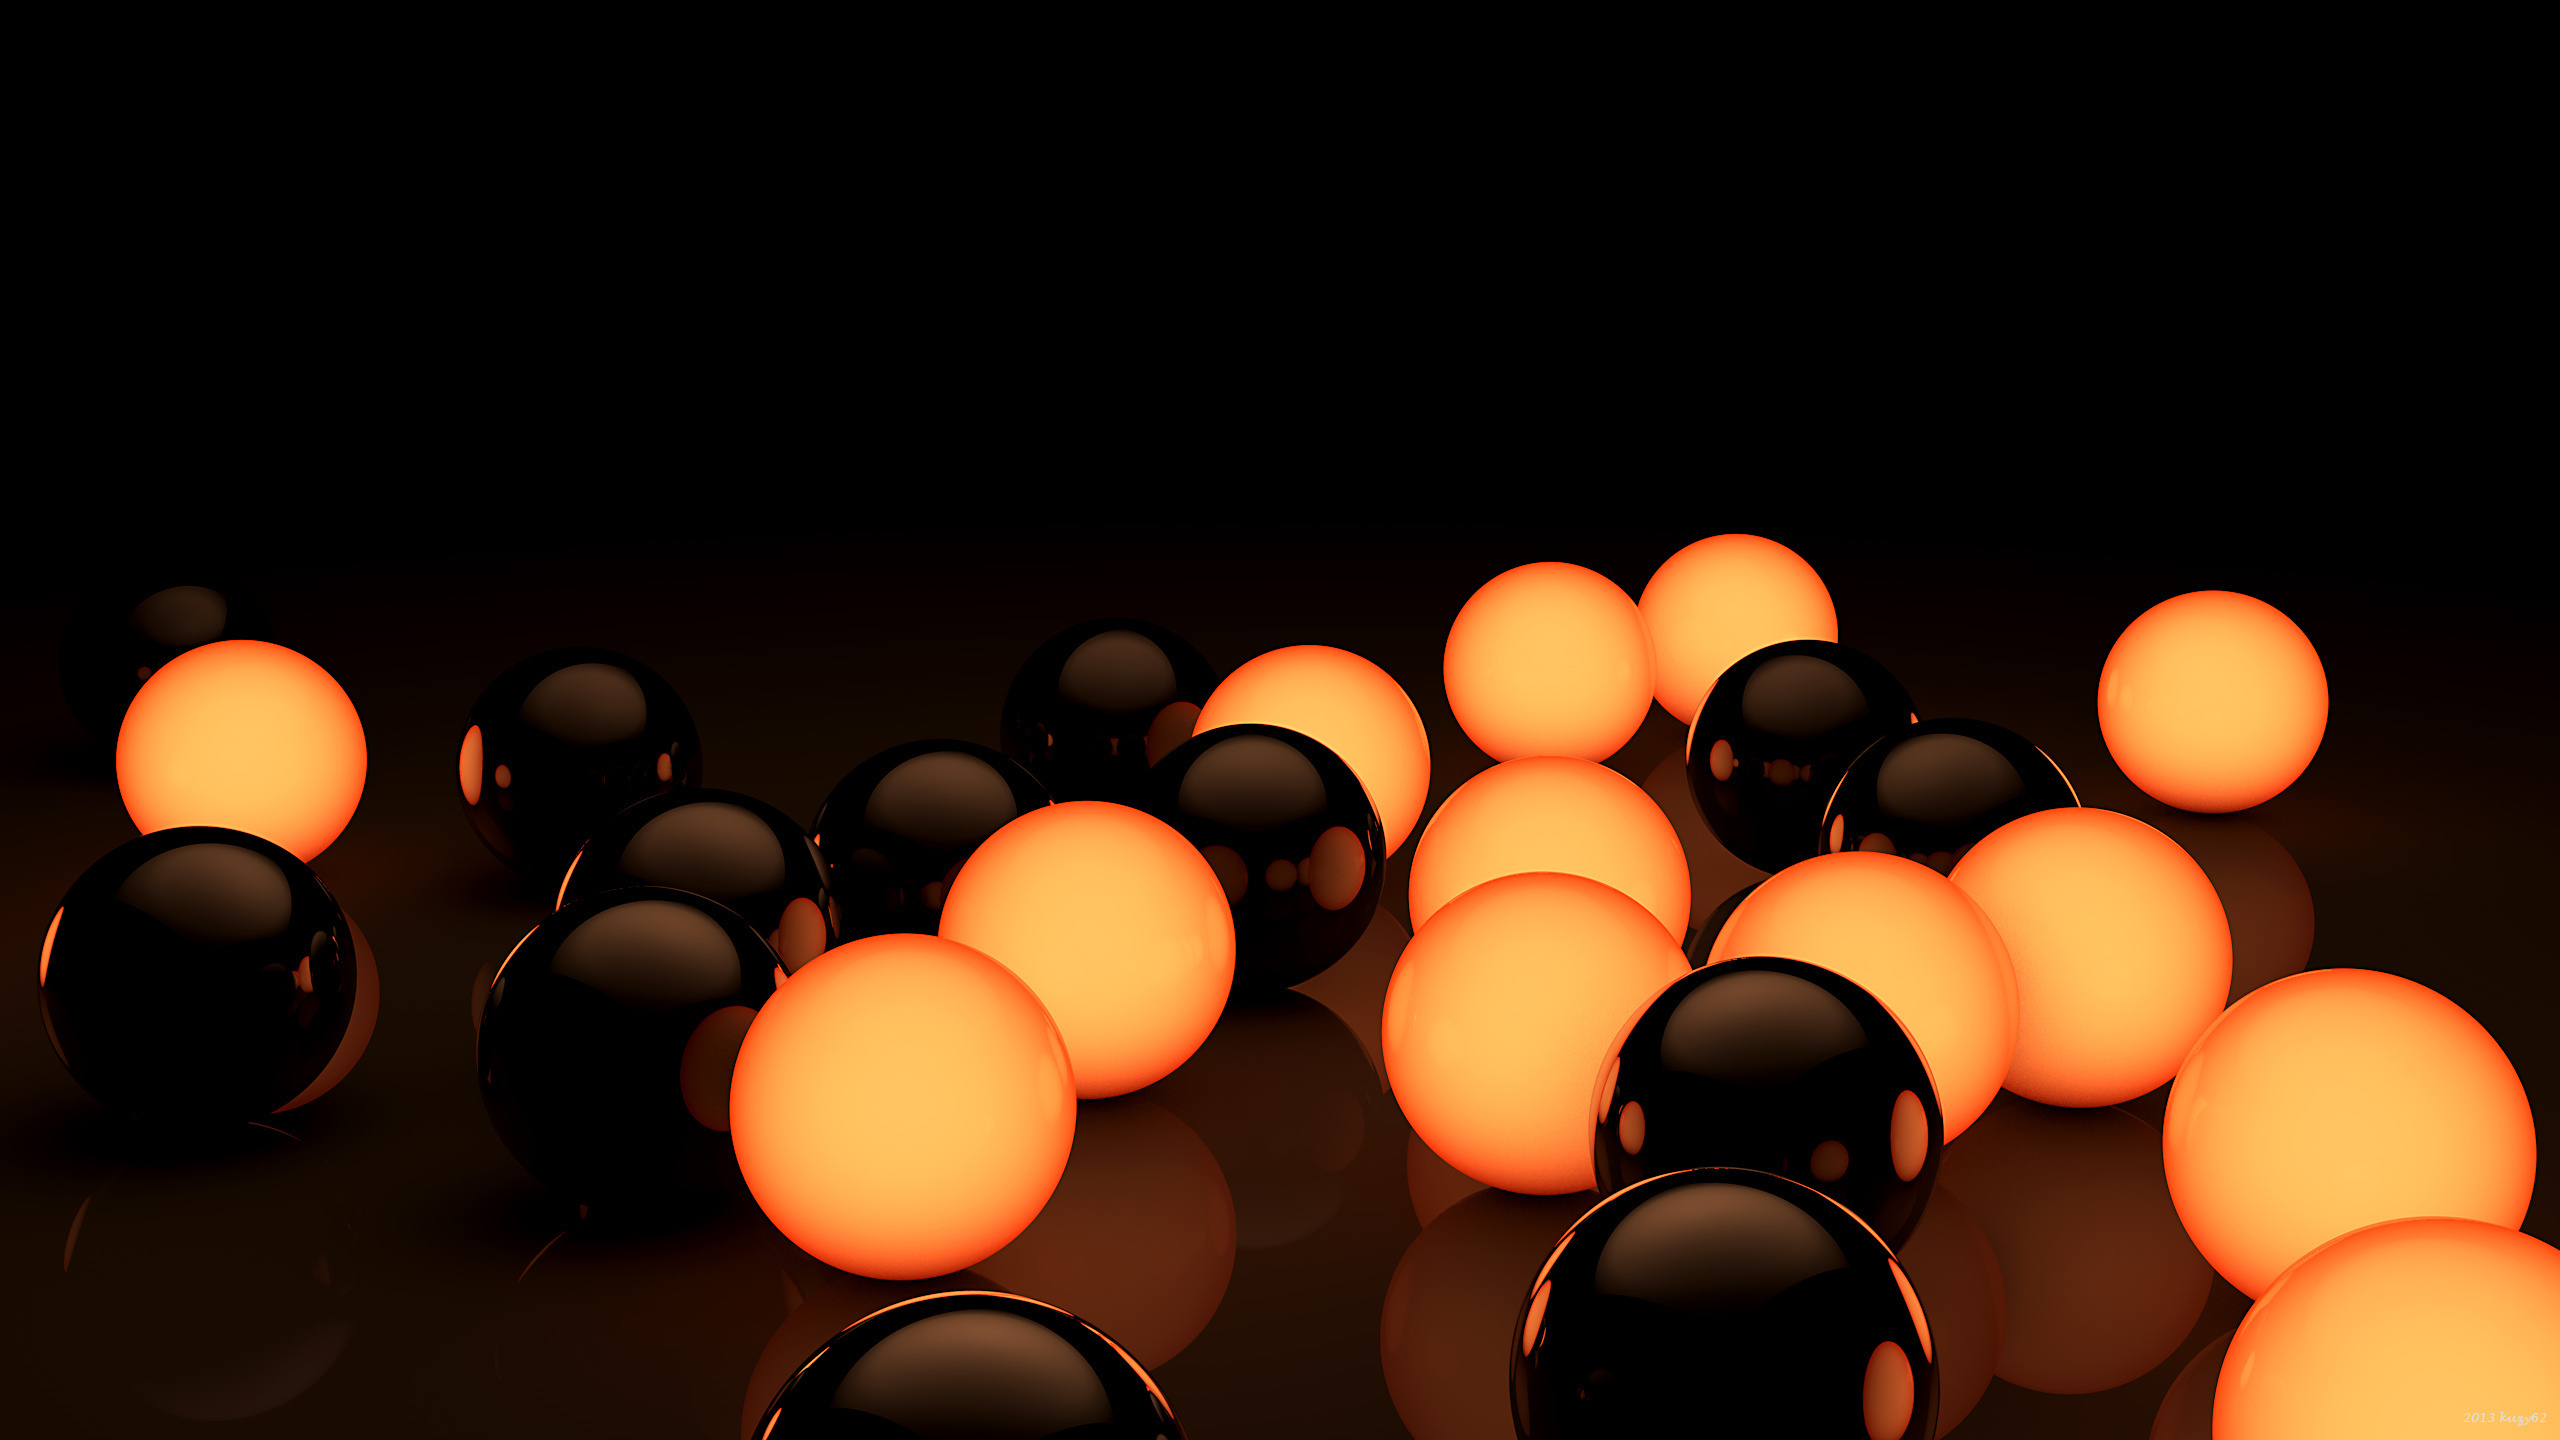 Scattered glowing glass globes